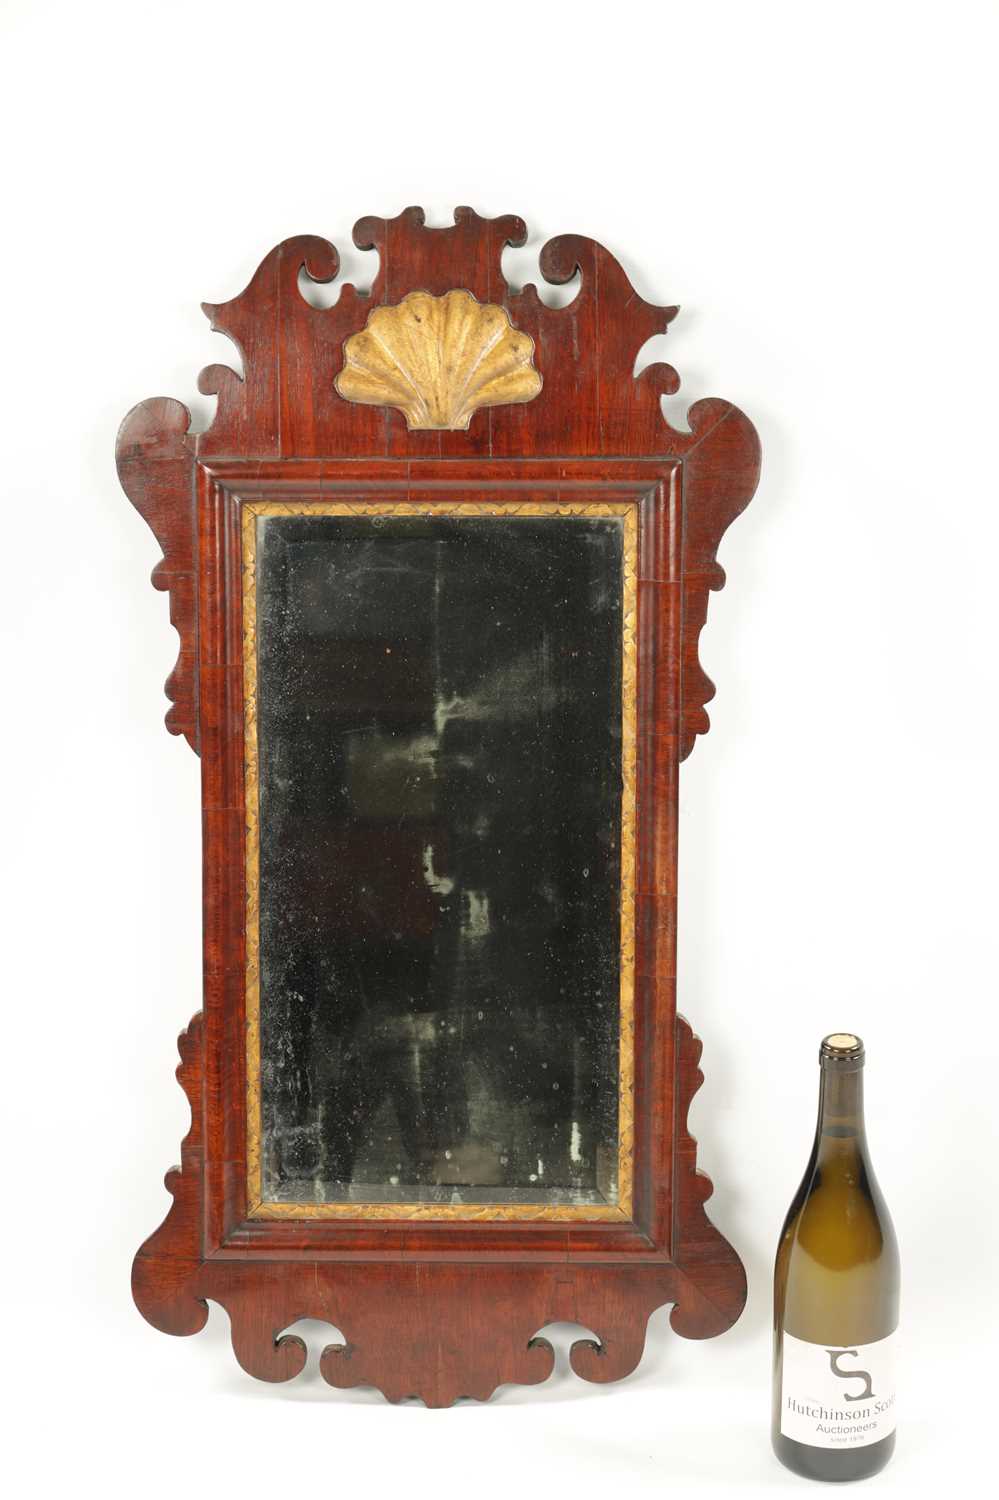 A SMALL 18TH CENTURY WALNUT HANGING MIRROR - Image 5 of 6